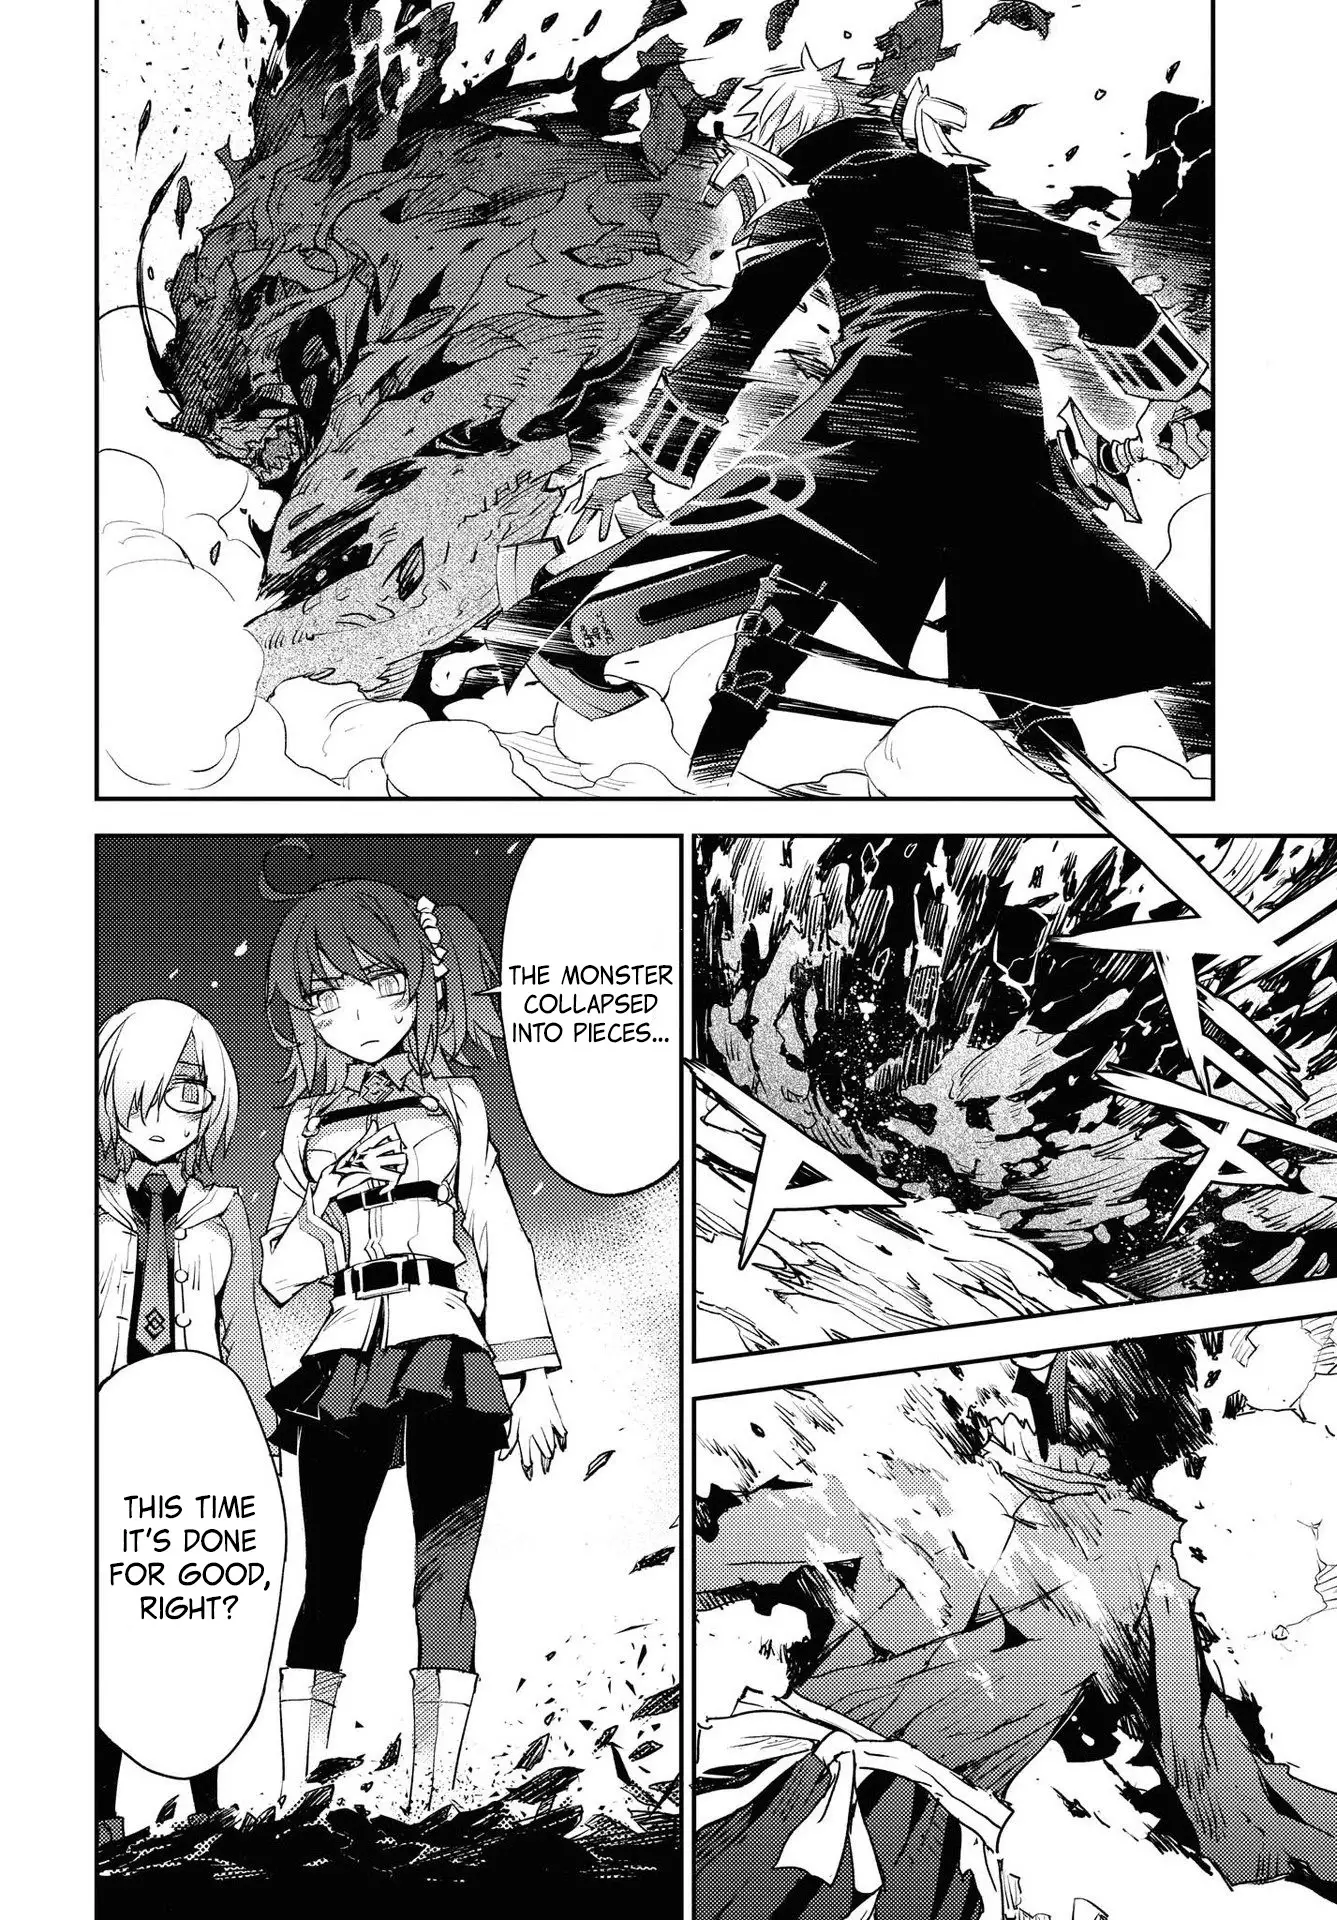 Fate/grand Order: Epic Of Remnant - Subspecies Singularity Iv: Taboo Advent Salem: Salem Of Heresy - 16 page 12